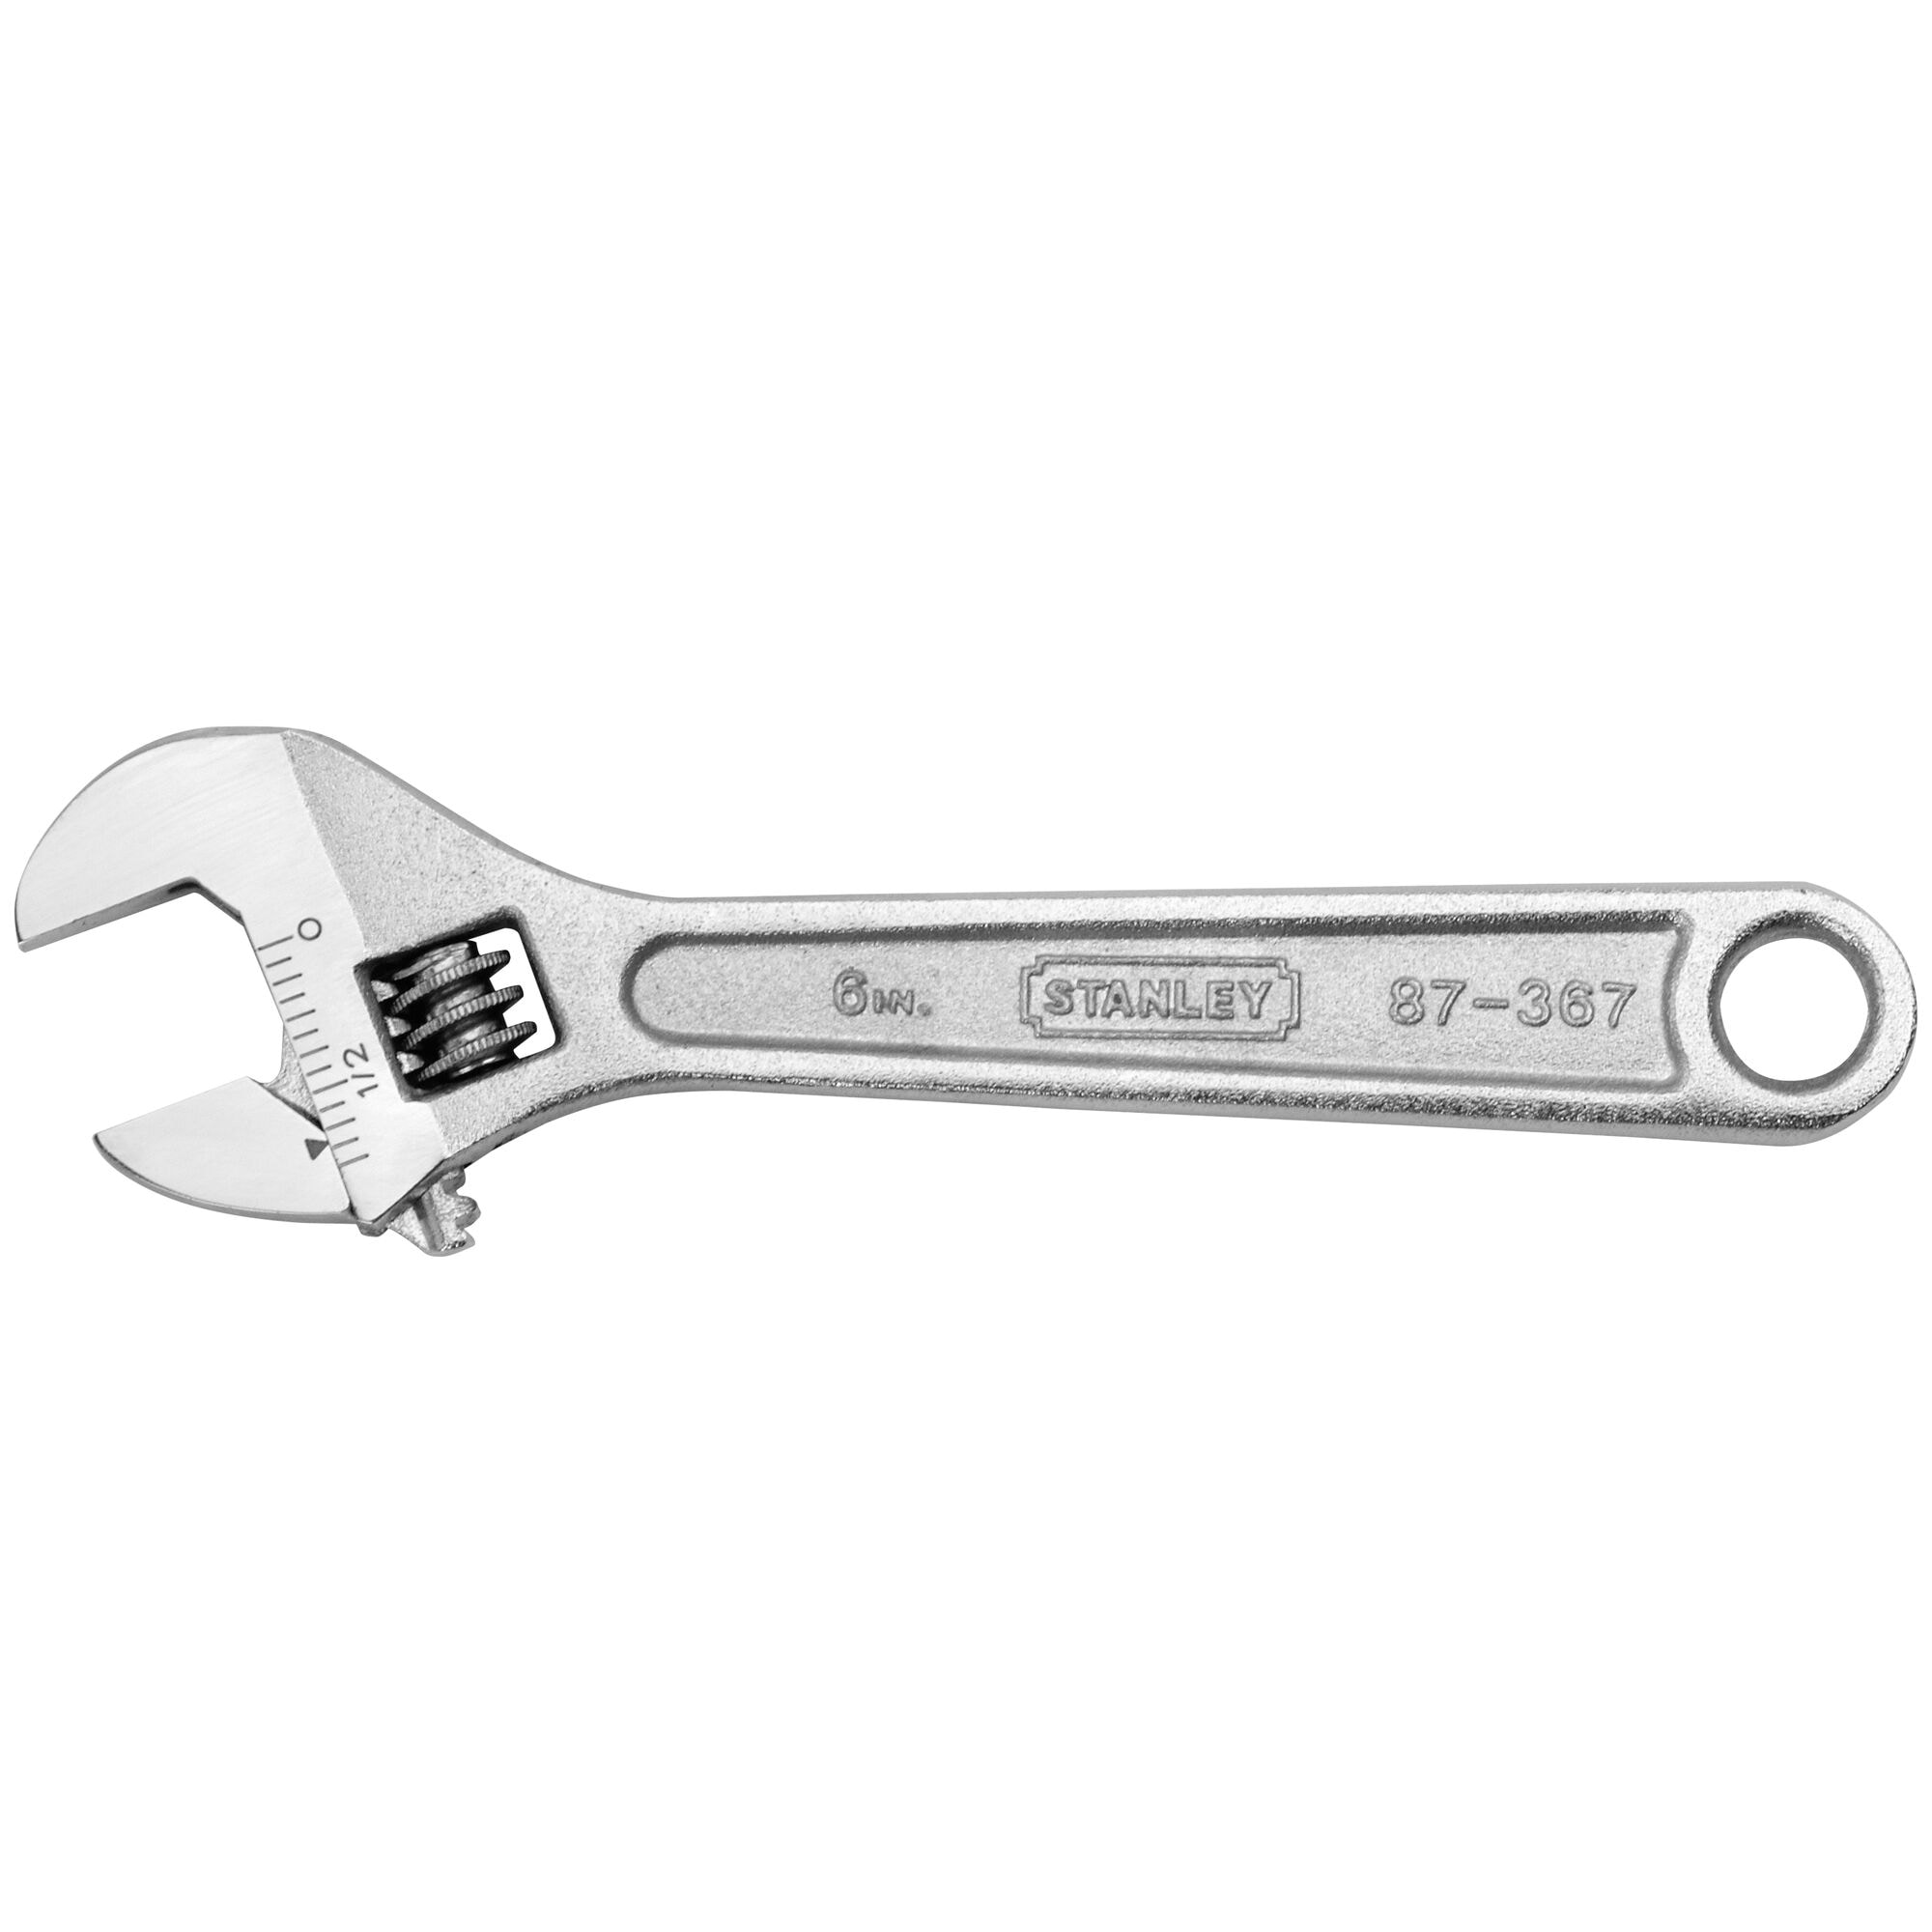 6 Adjustable Wrenches Adjustable Spanner 19 x 155mm